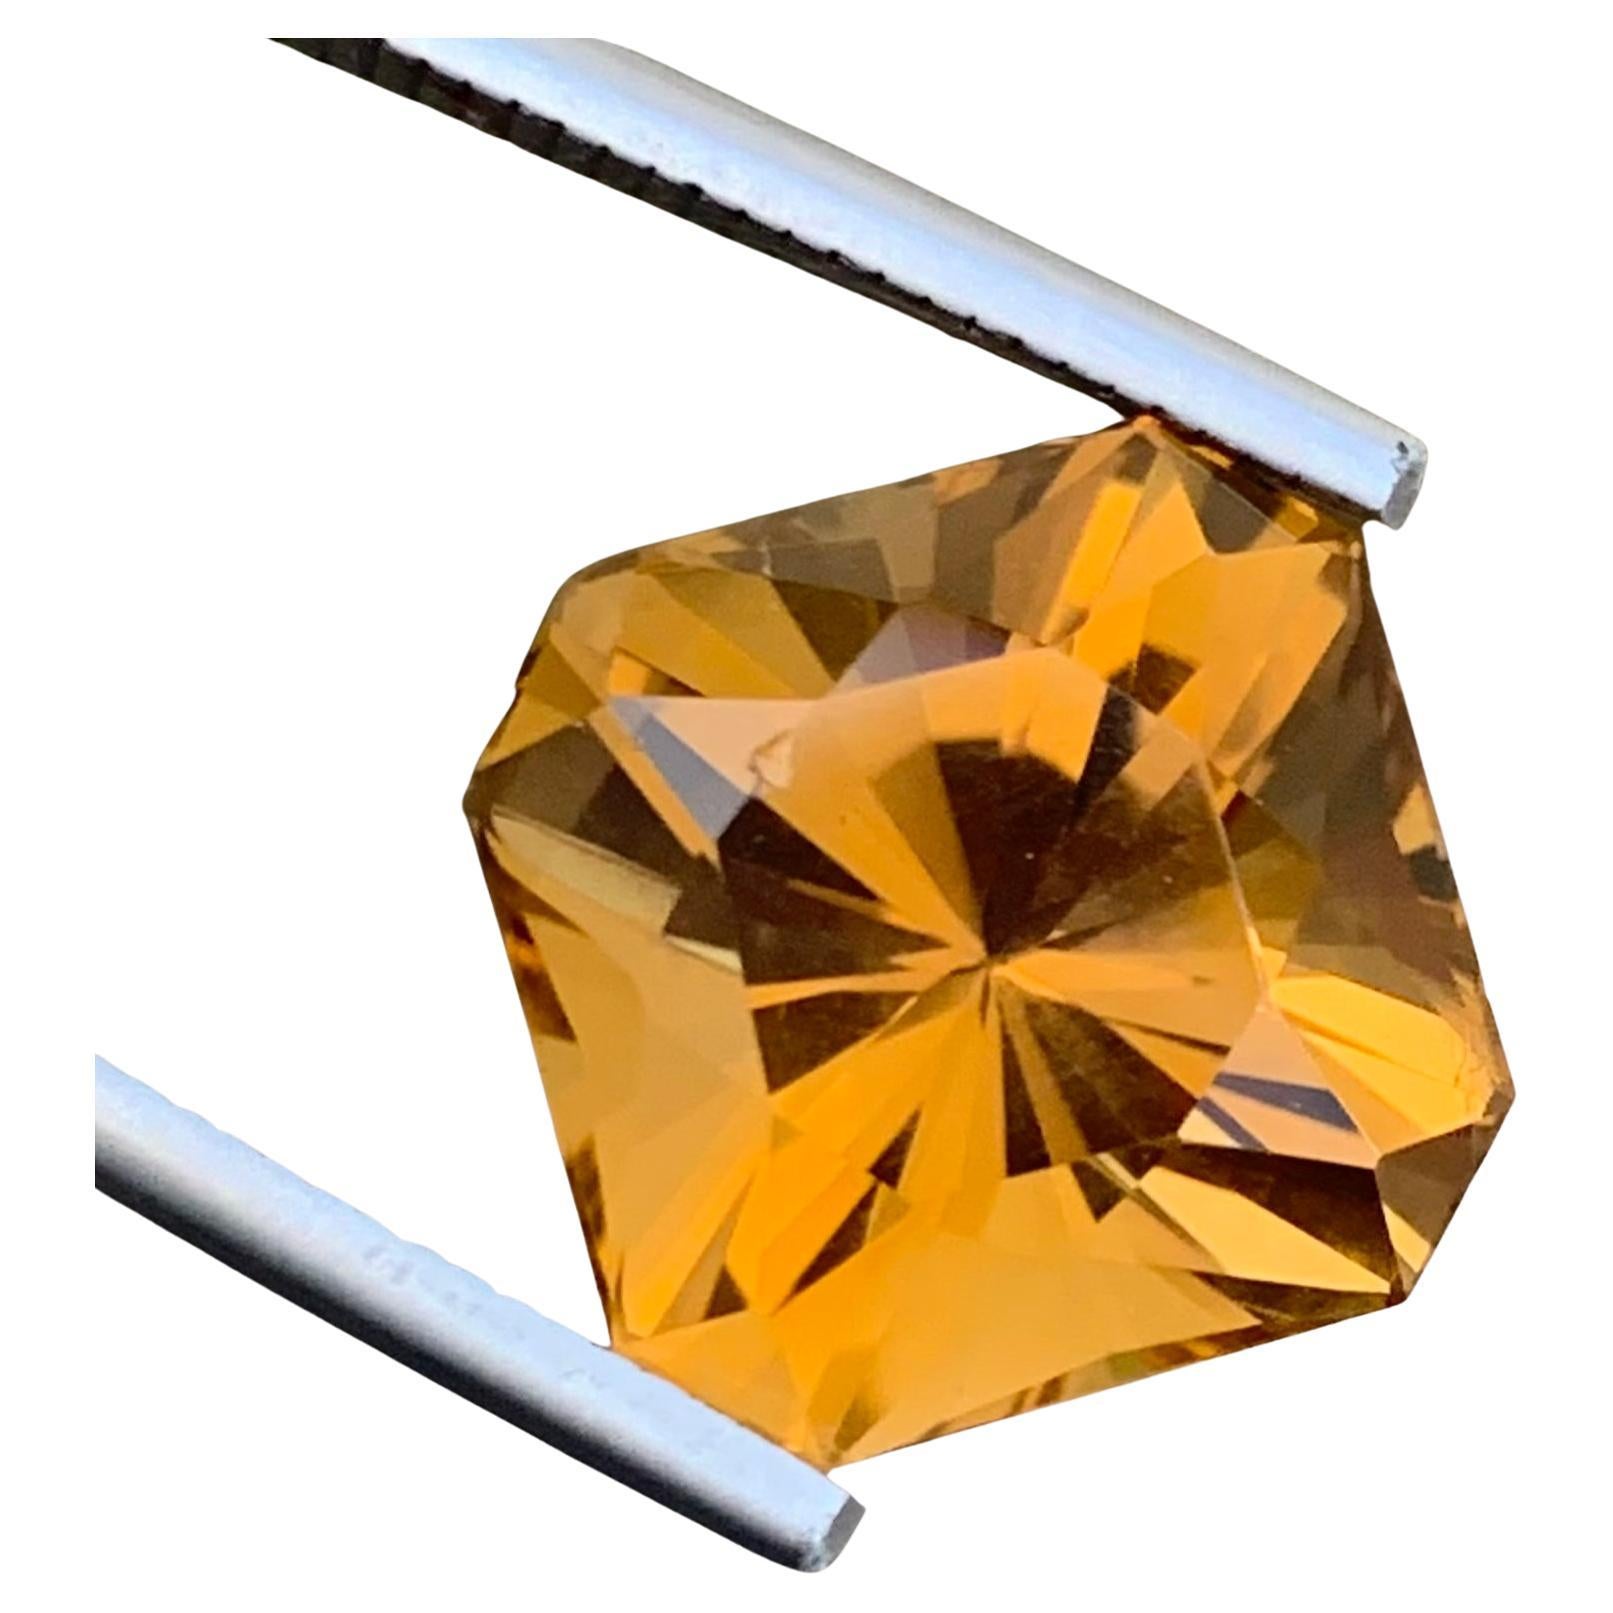 10.60 Carats Natural Loose Fancy Cut Citrine Gemstone From Brazil Mine